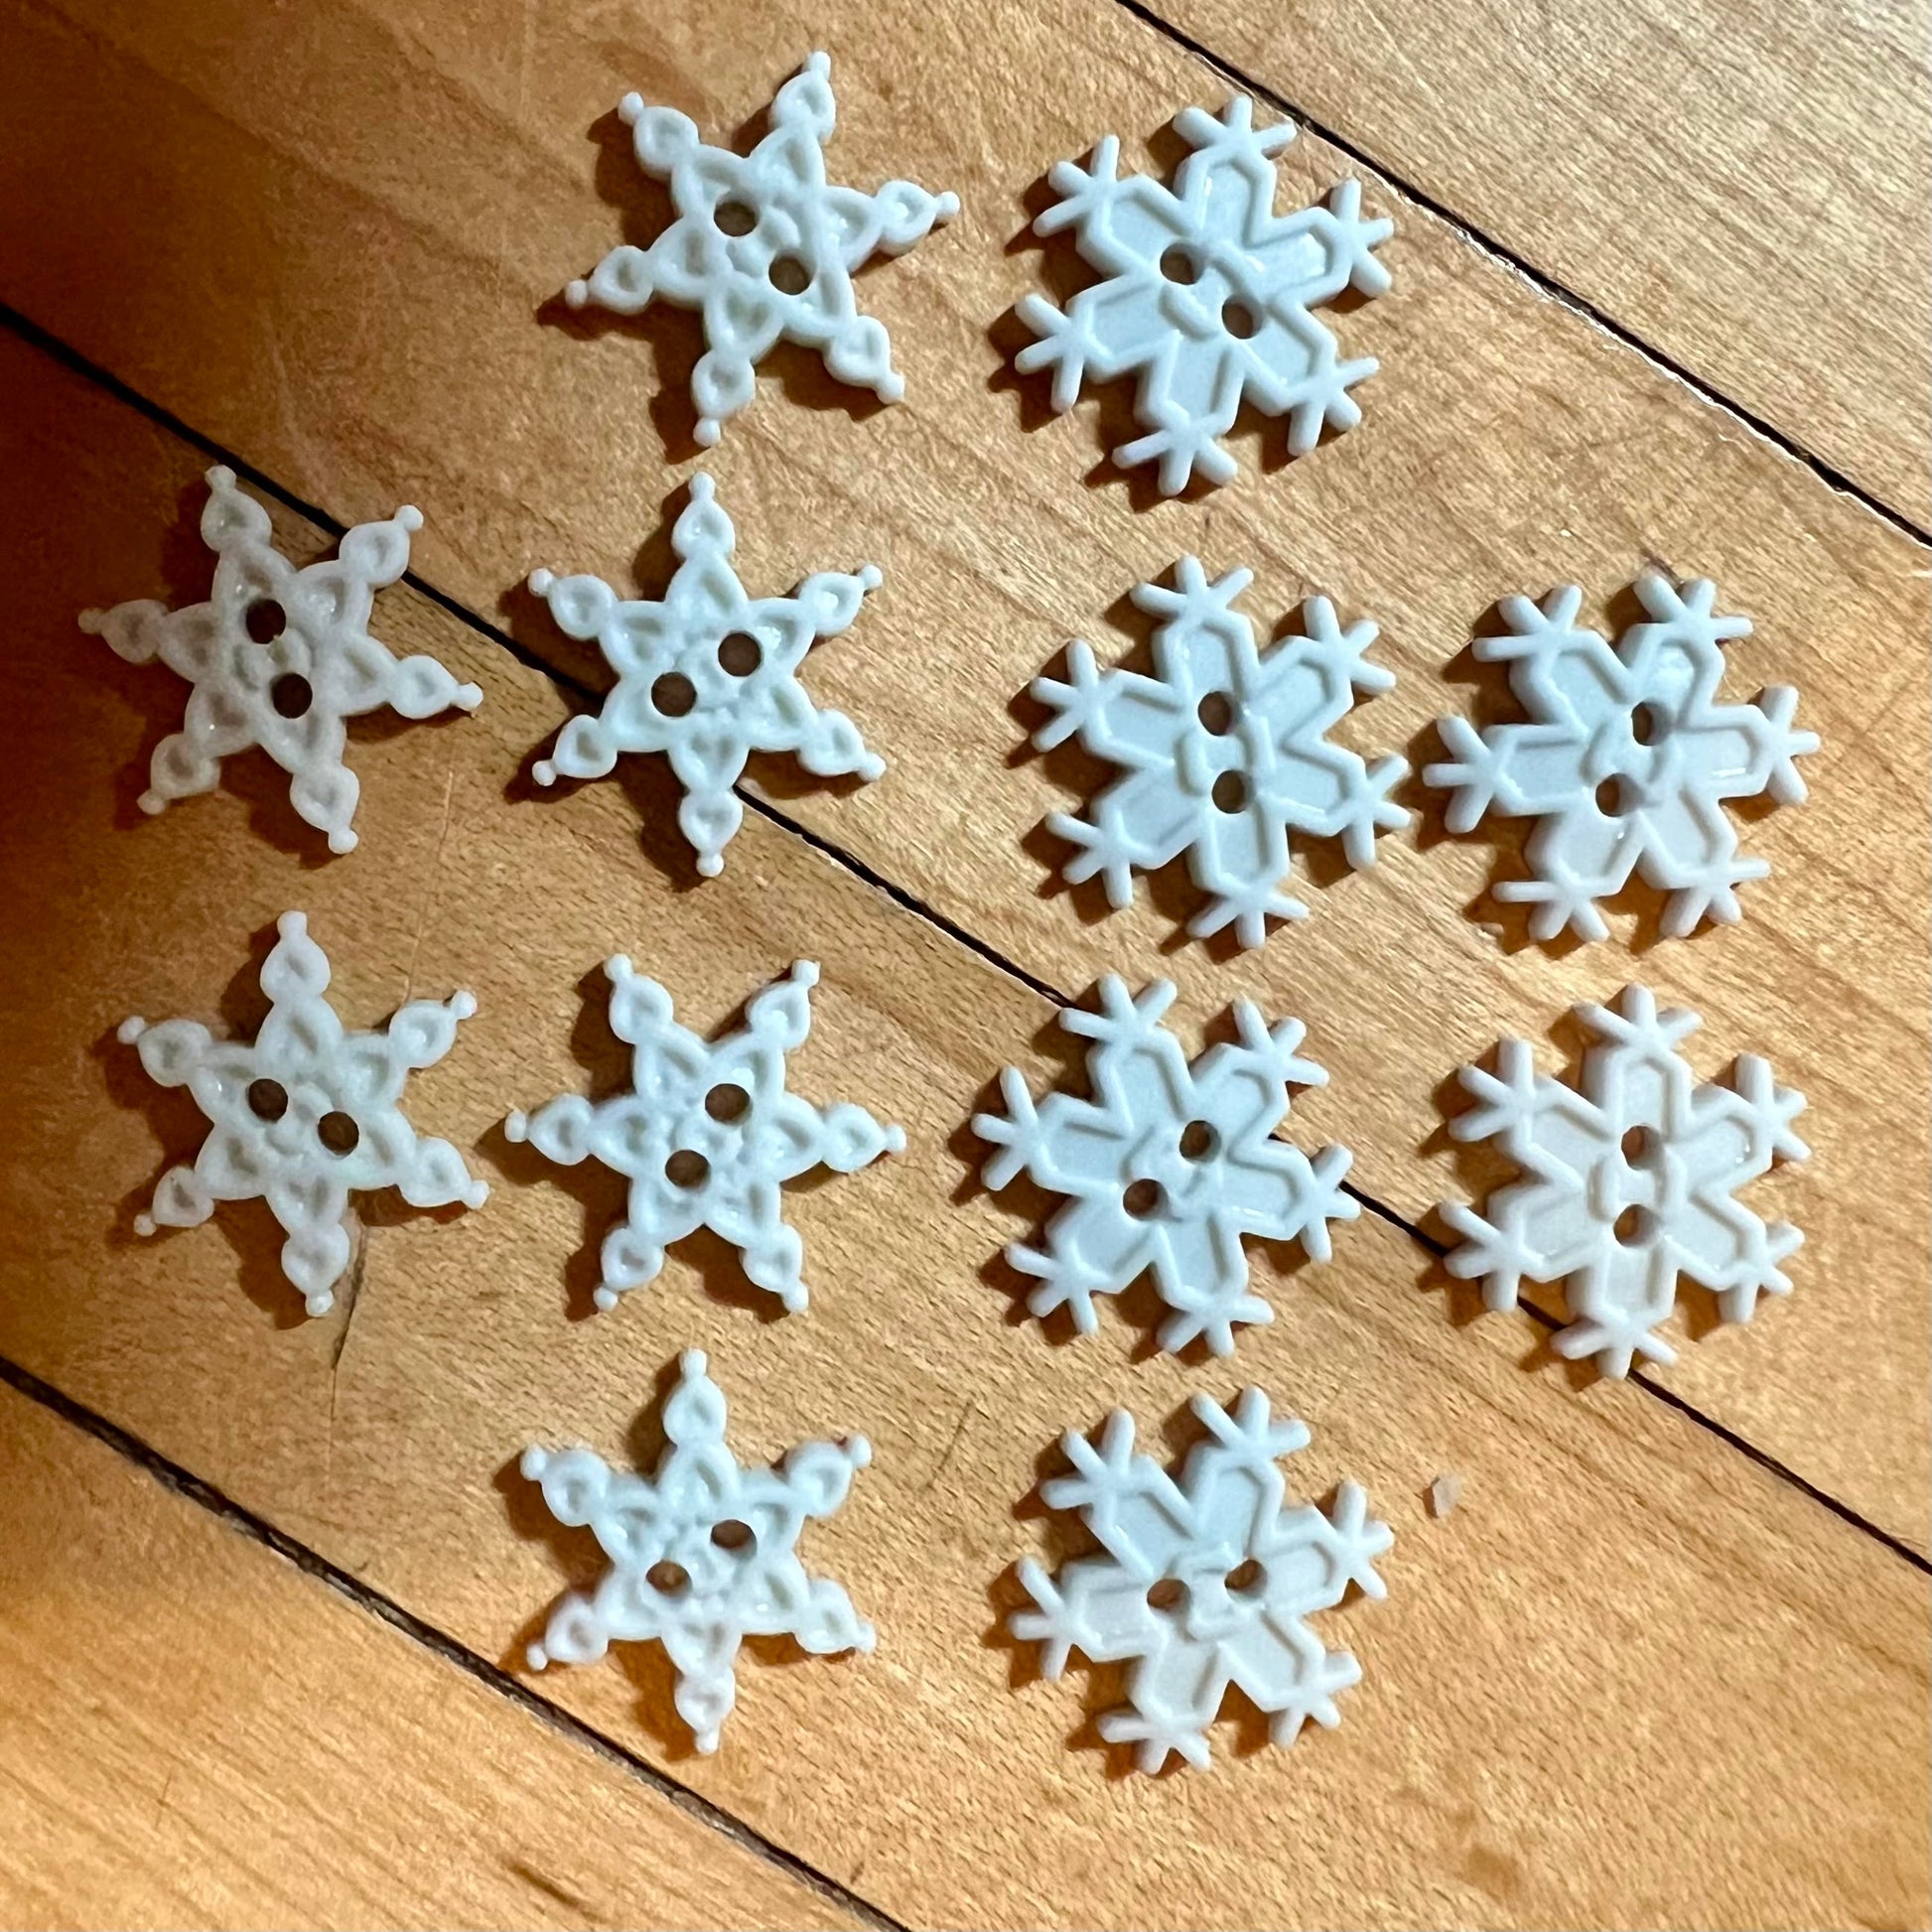 Snowflake Magnets or Snowflake Pinback Buttons 1 inch Pinback Buttons